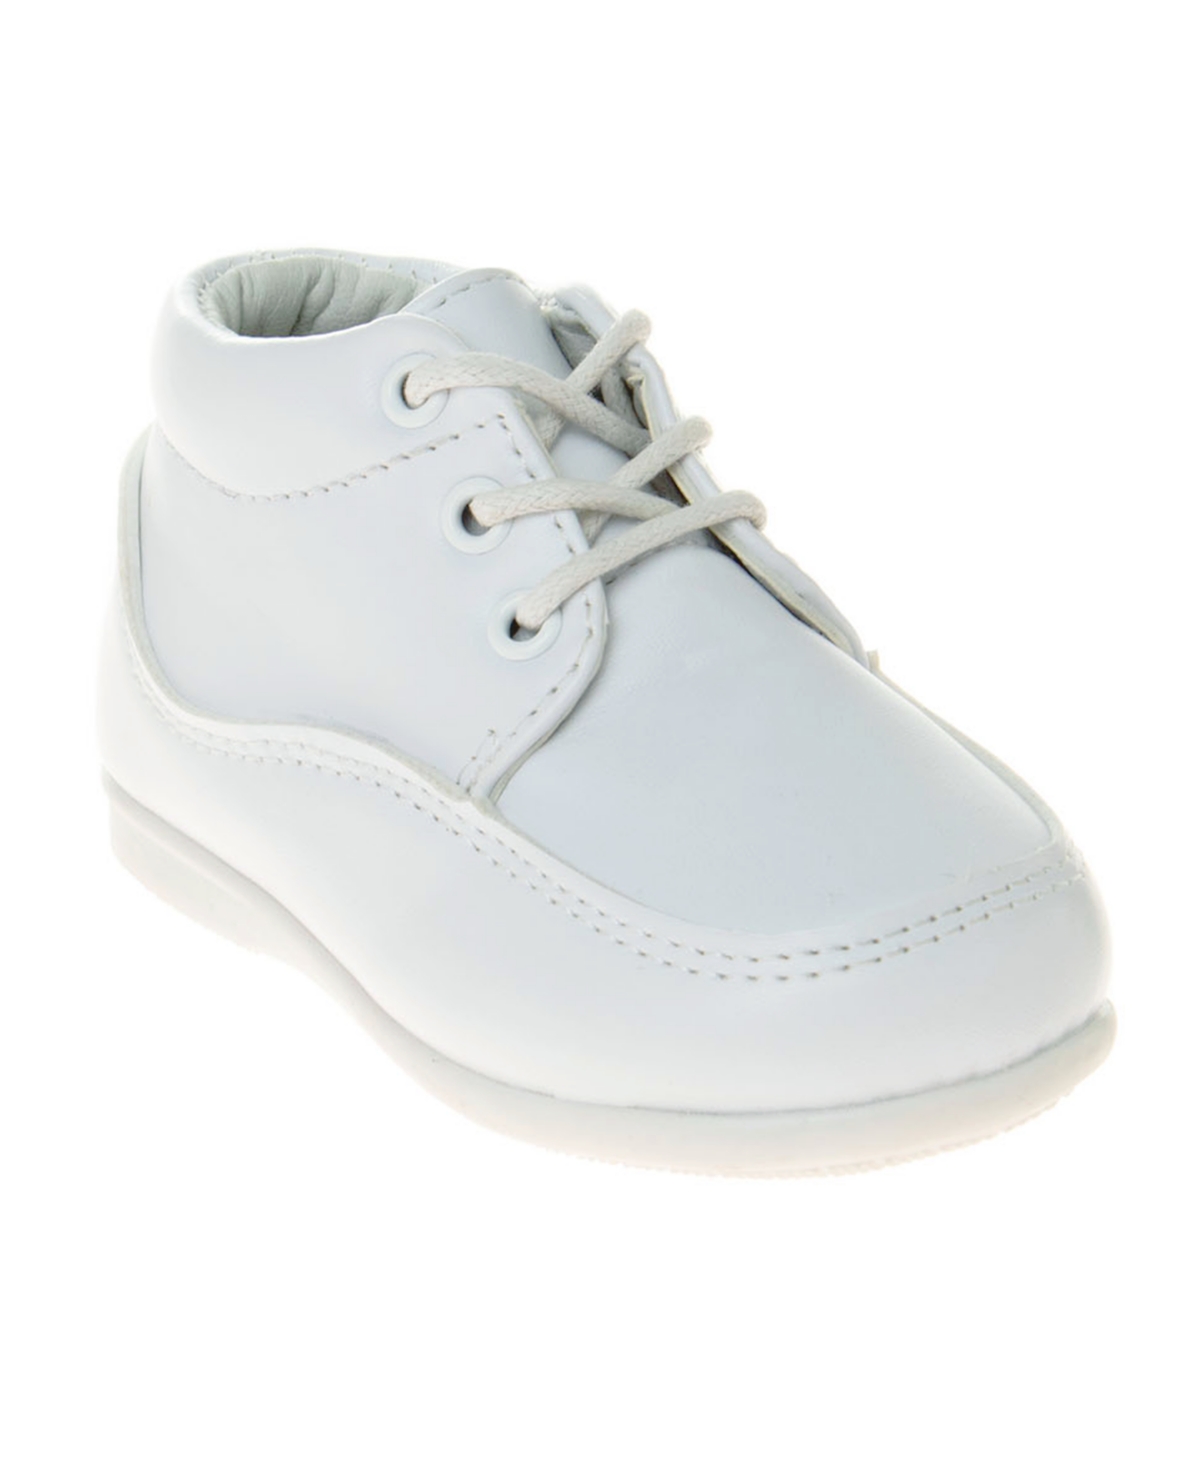 Josmo Kids' Little Boys Lace Up Dress Shoes In White Patent